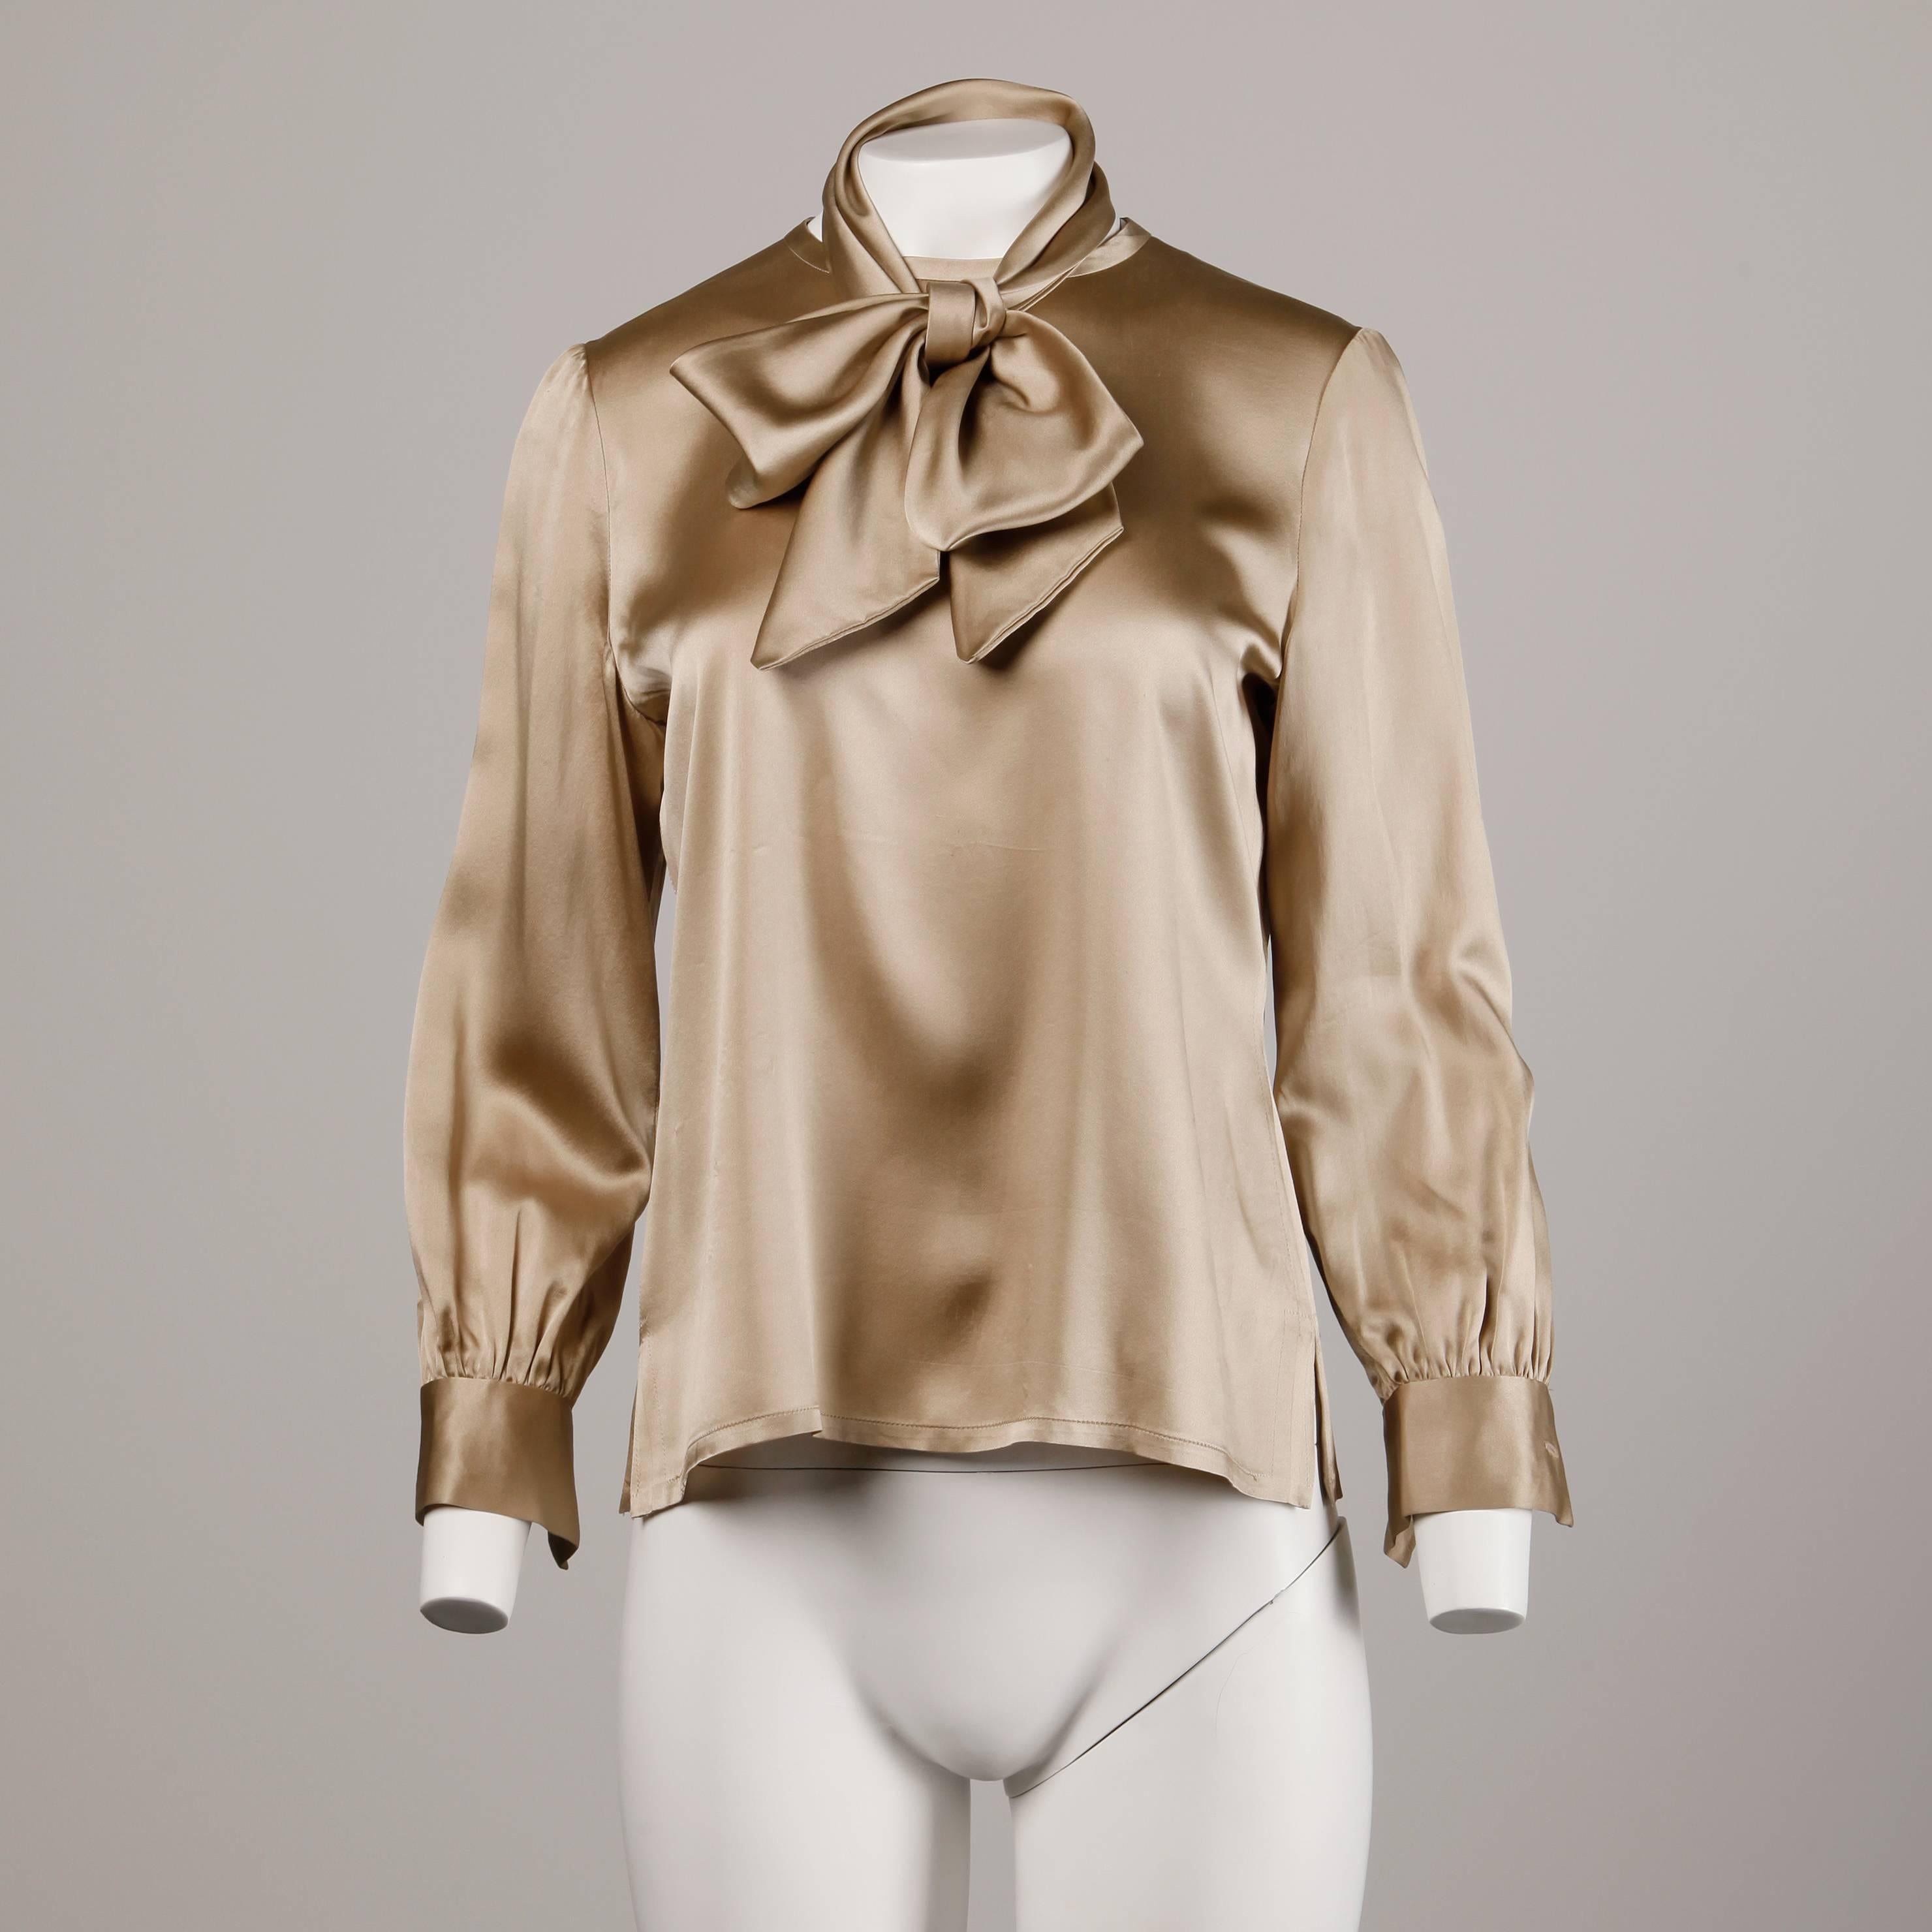 Gorgeous vintage champagne silk blouse with an optional ascot bow sash. The blouse buttons up the back and is made from high quality medium weight silk. The condition is excellent with no damage. However the blouse appears to have been let out on